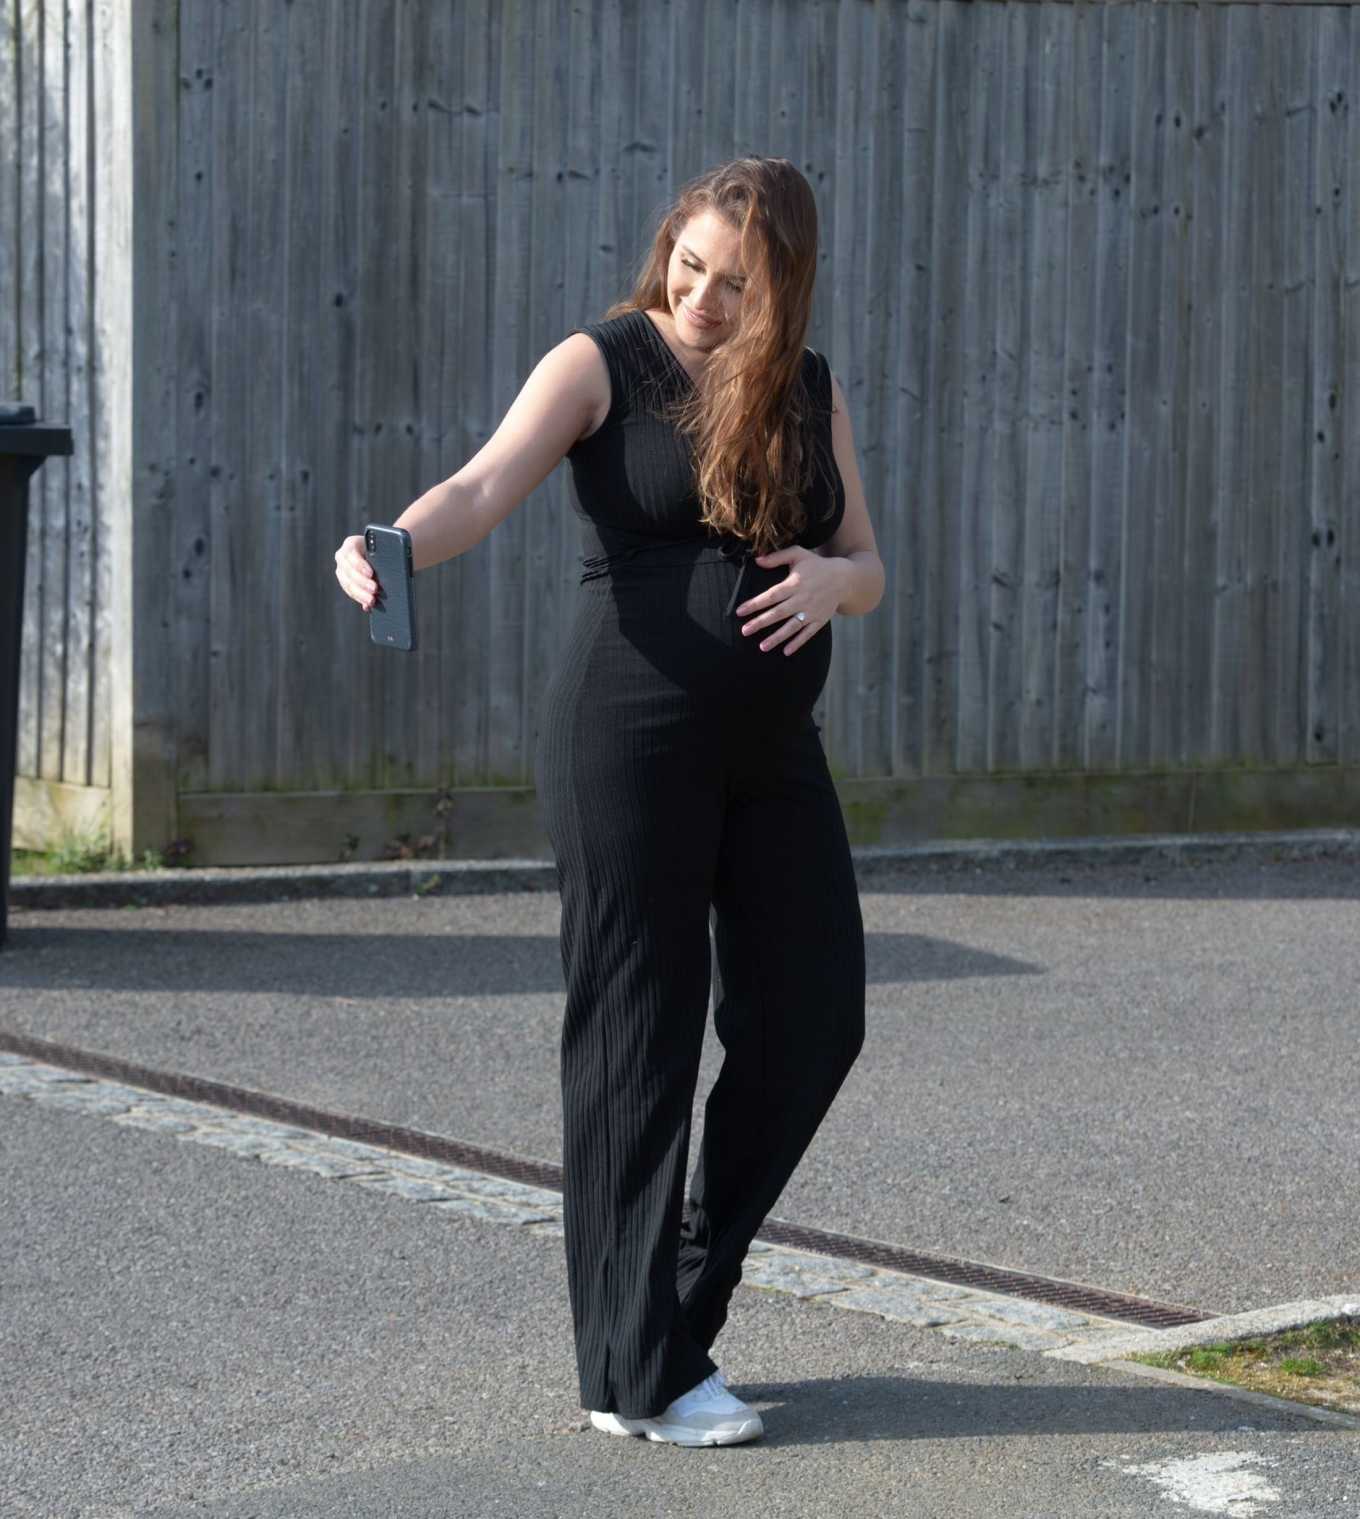 Chloe Goodman â€“ Showing baby bump while out for a morning walk at her home